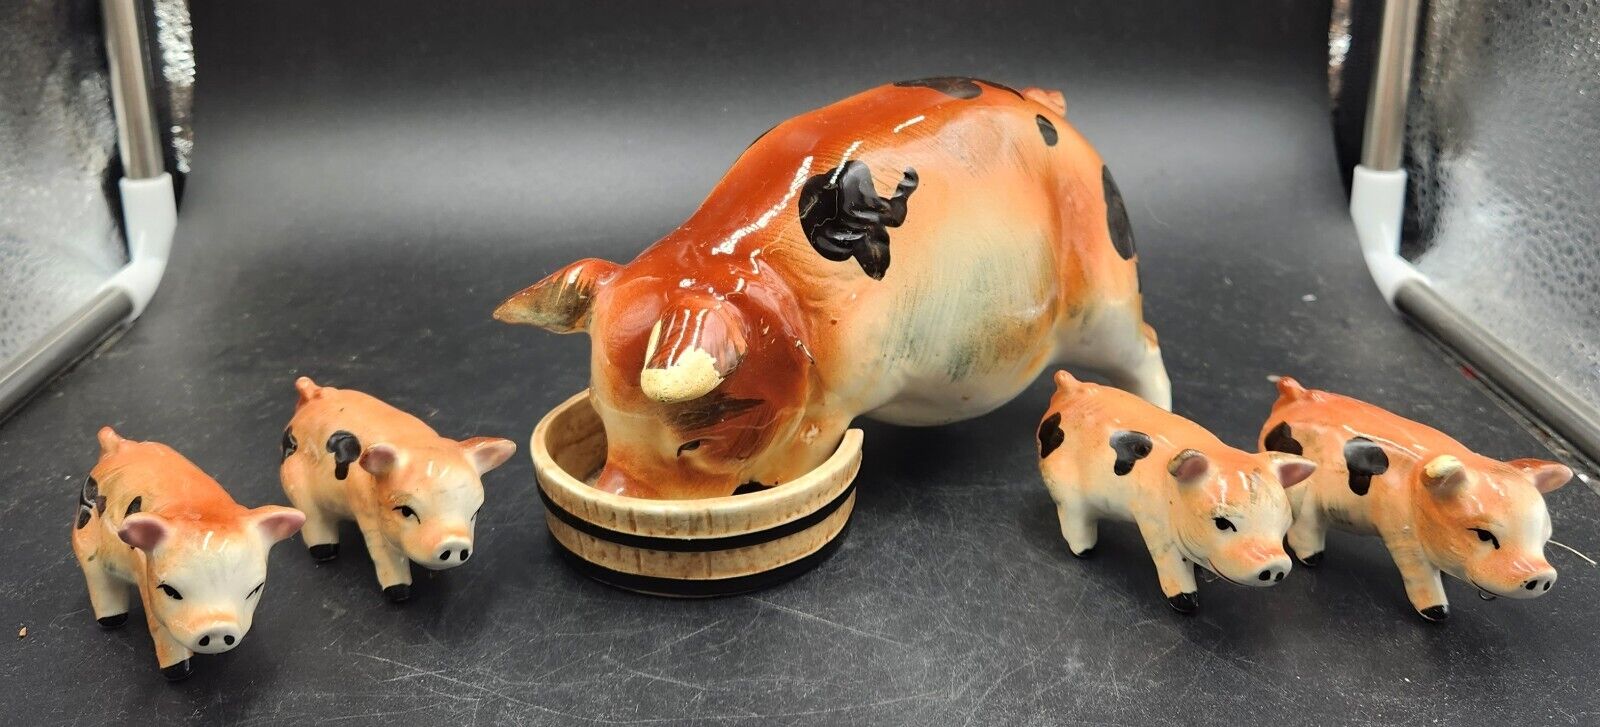 VINTAGE SOW HOG And 4 PIGLETS FIGURINES PIG CHAIN FAMILY Japan